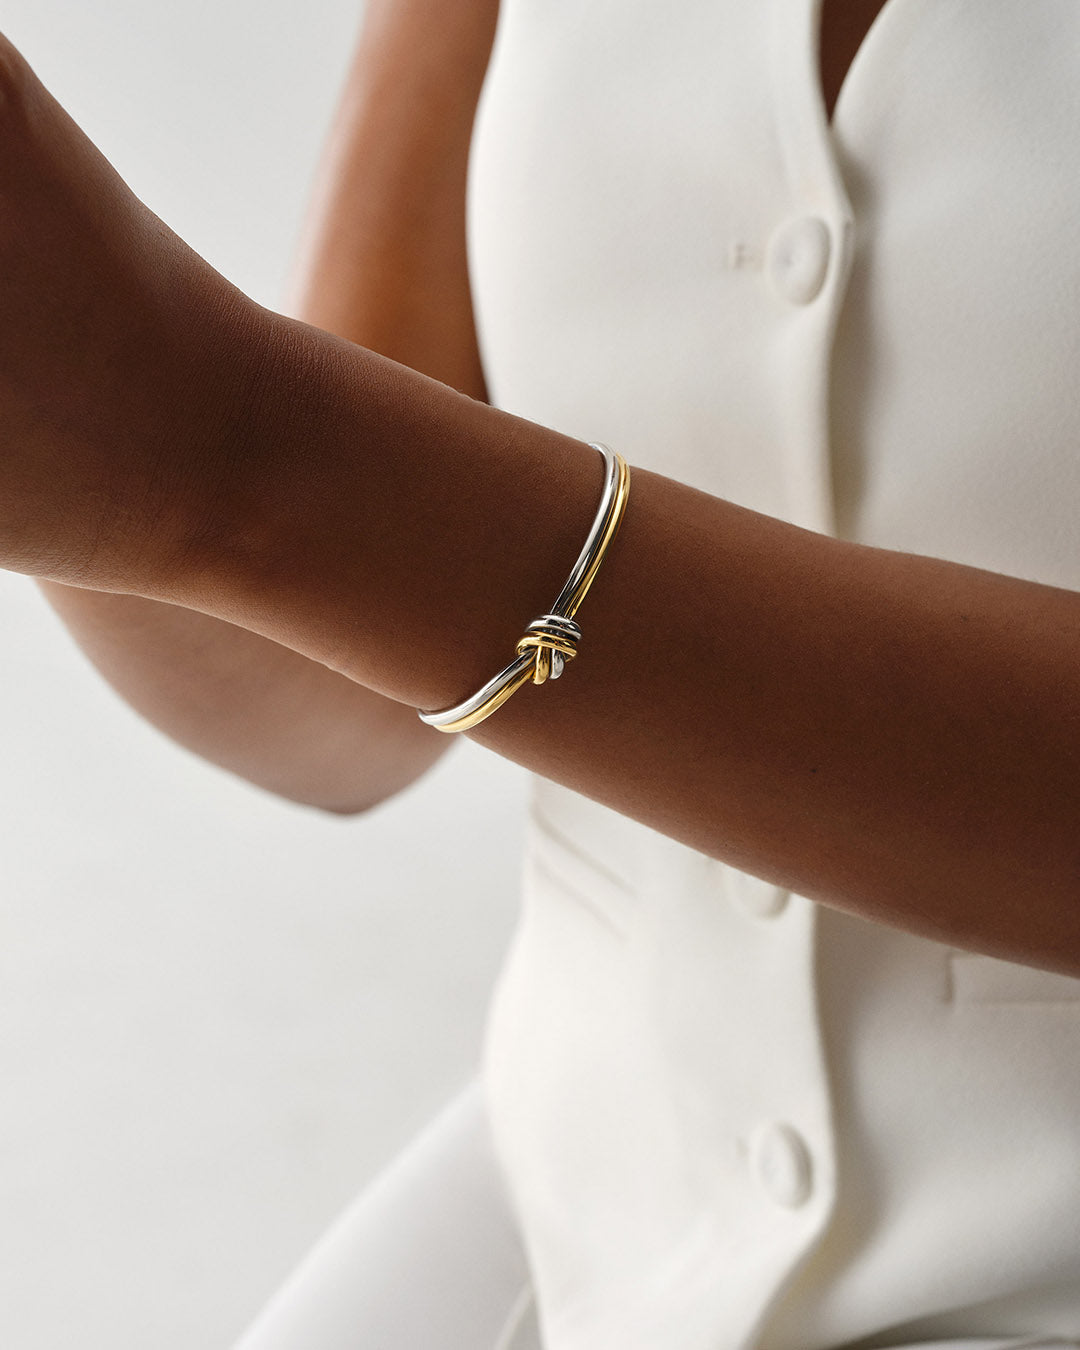 Luxury Double Line Rope T Knot Designer Bangle Bracelet In 18K Gold And  Silver Shining Ladies Bangles 2022 For Couples Perfect Valentines Day Gift  From Fashion1516, $21.93 | DHgate.Com